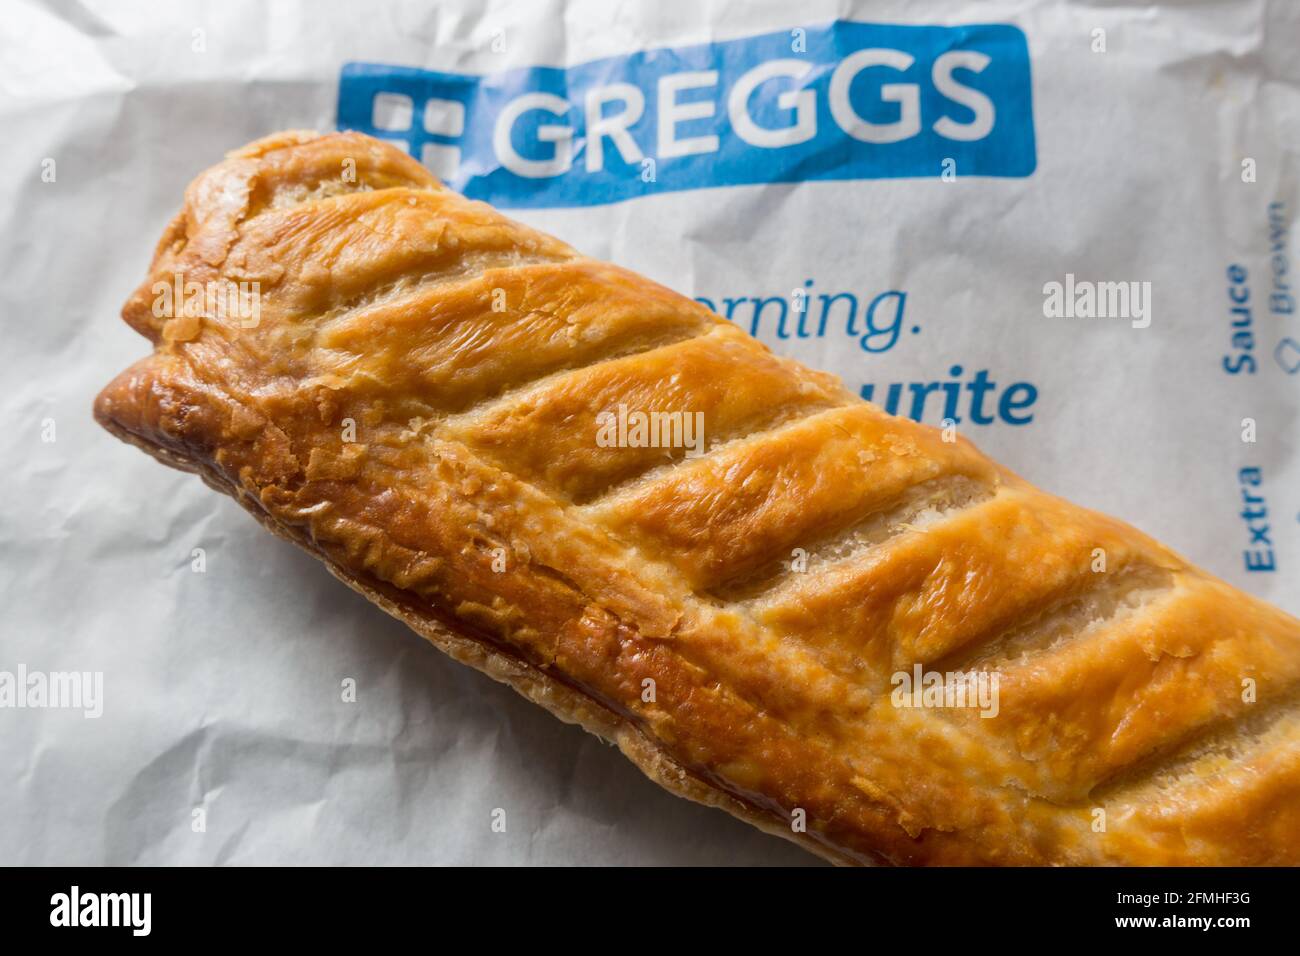 https://c8.alamy.com/comp/2FMHF3G/sausage-roll-sausage-meat-wrapped-in-layers-of-crisp-by-greggs-bake-store-2FMHF3G.jpg